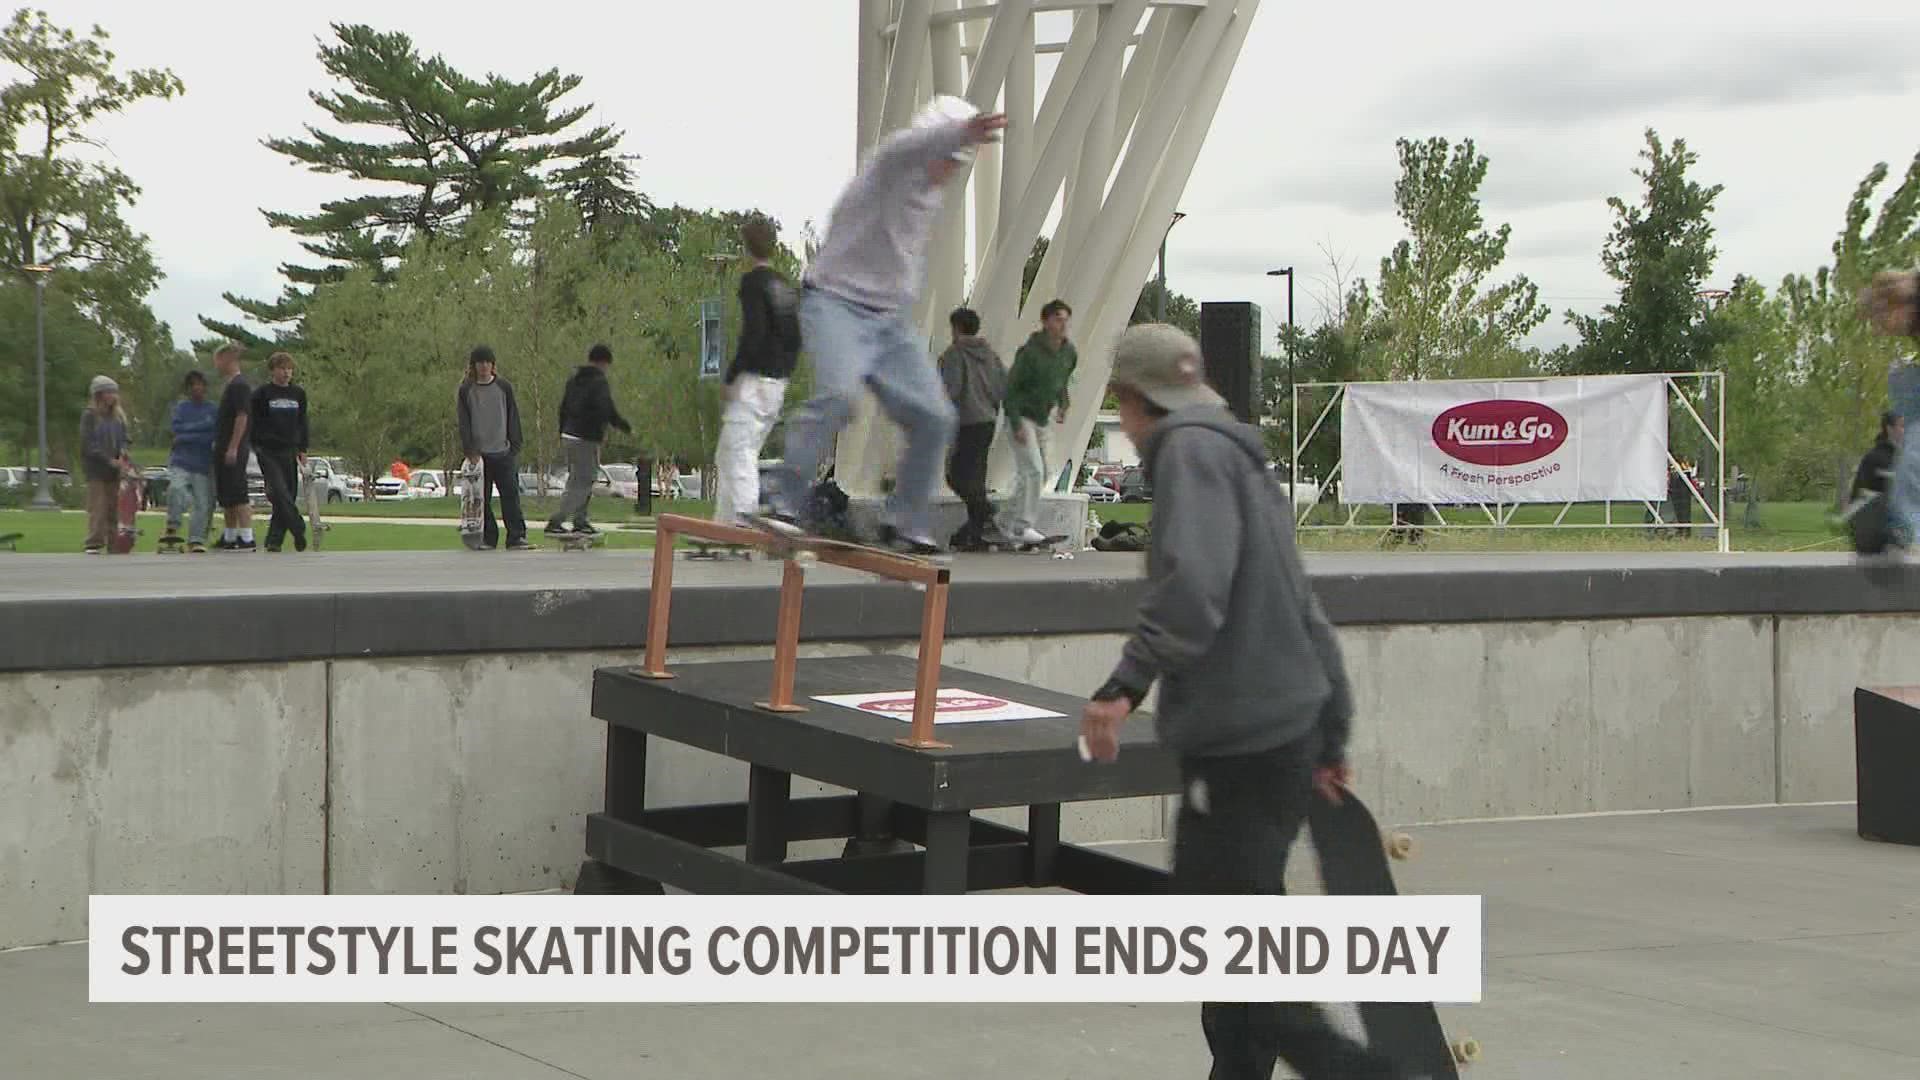 The skateboarding event runs through tomorrow evening, with an afterparty to close out the events.